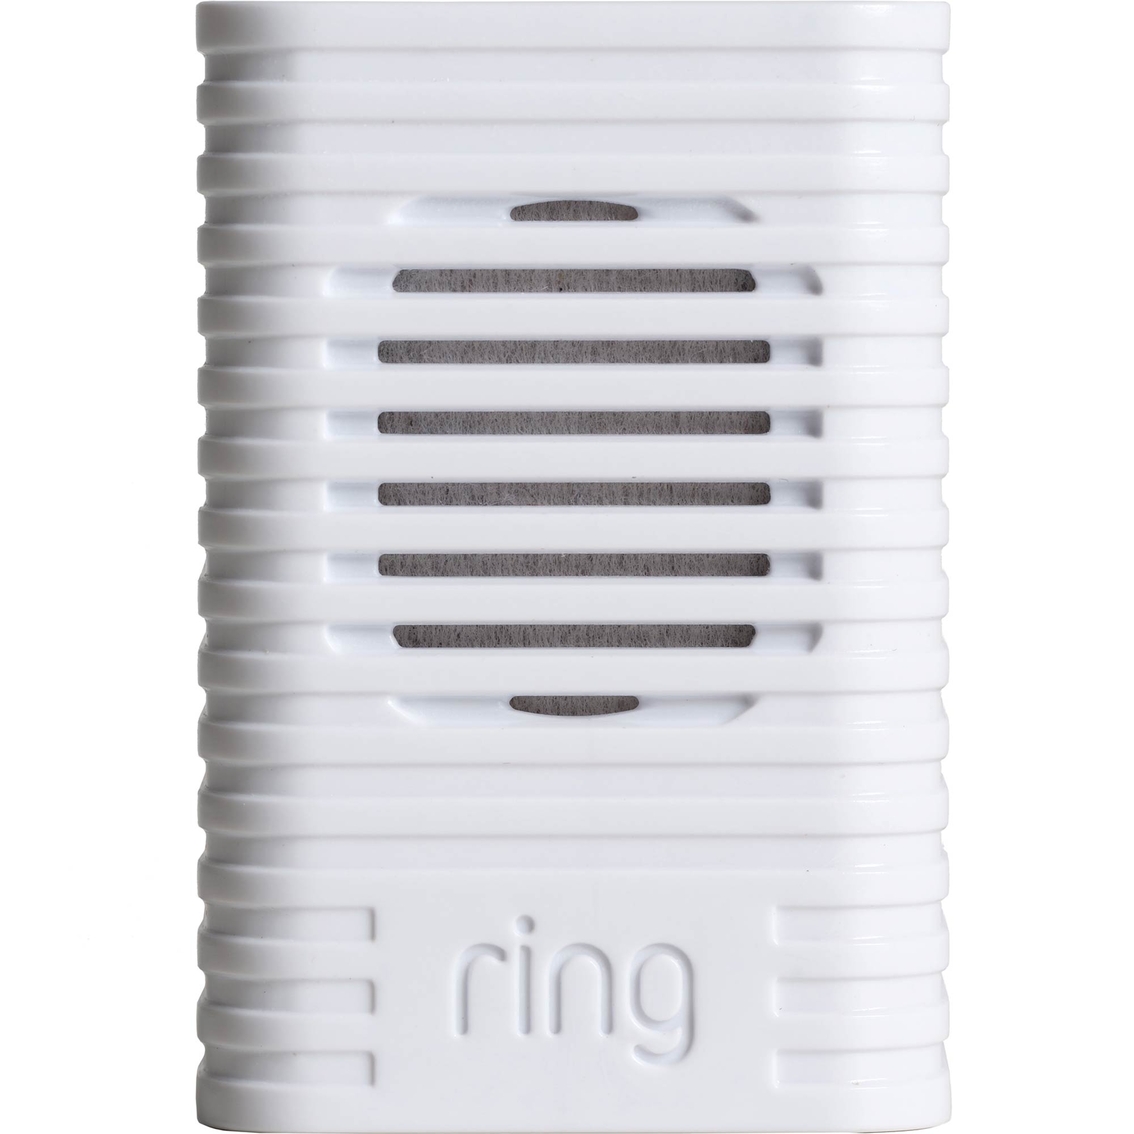 Ring Doorbell Chime